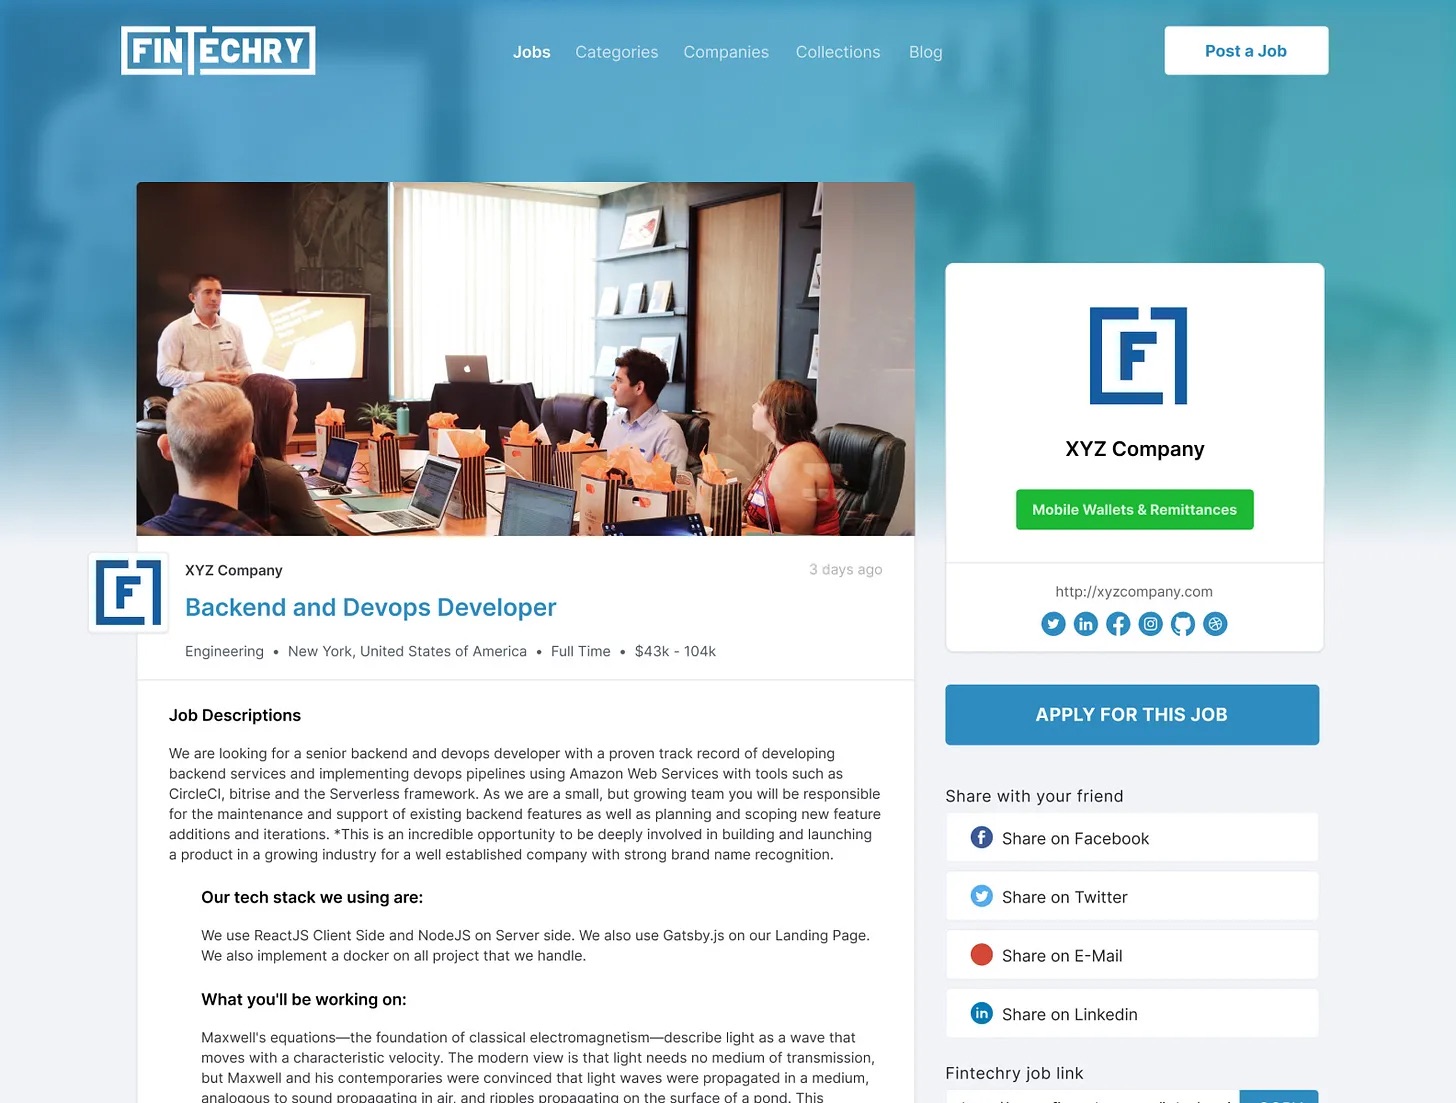 Career page of Fintechry